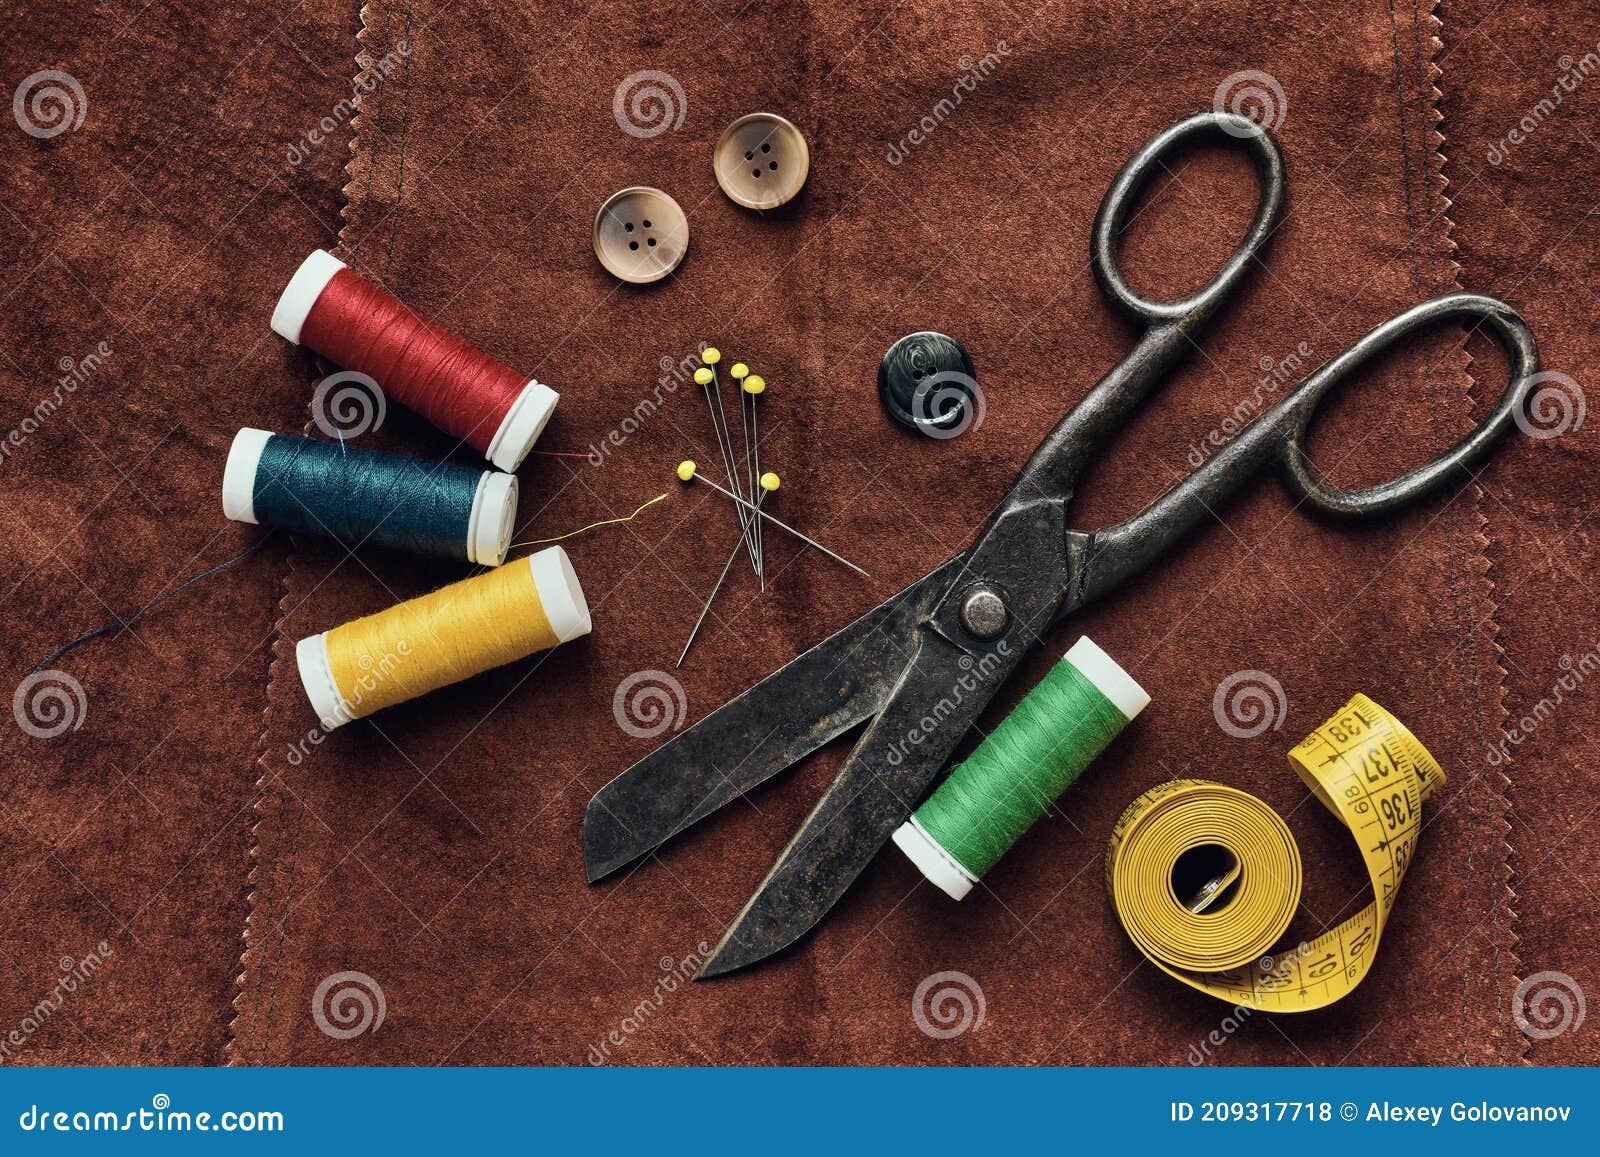 29,800+ Old Scissors Stock Photos, Pictures & Royalty-Free Images